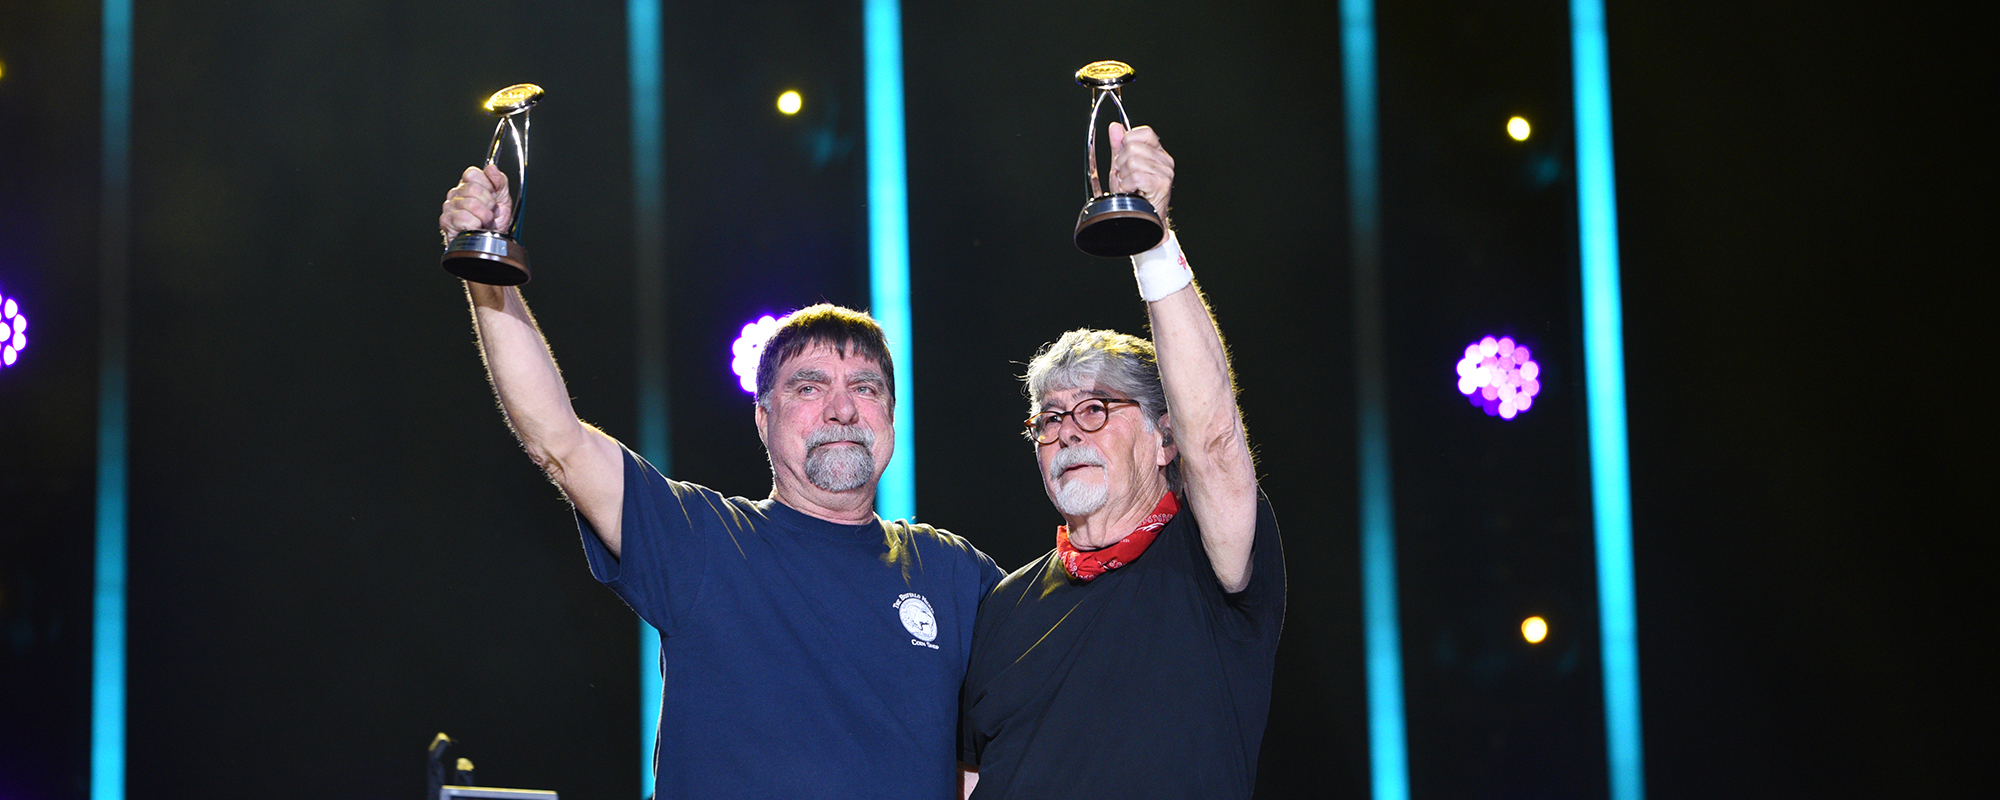 Alabama’s Country Legacy Celebrated During CMA Fest (Watch) 100.9 The